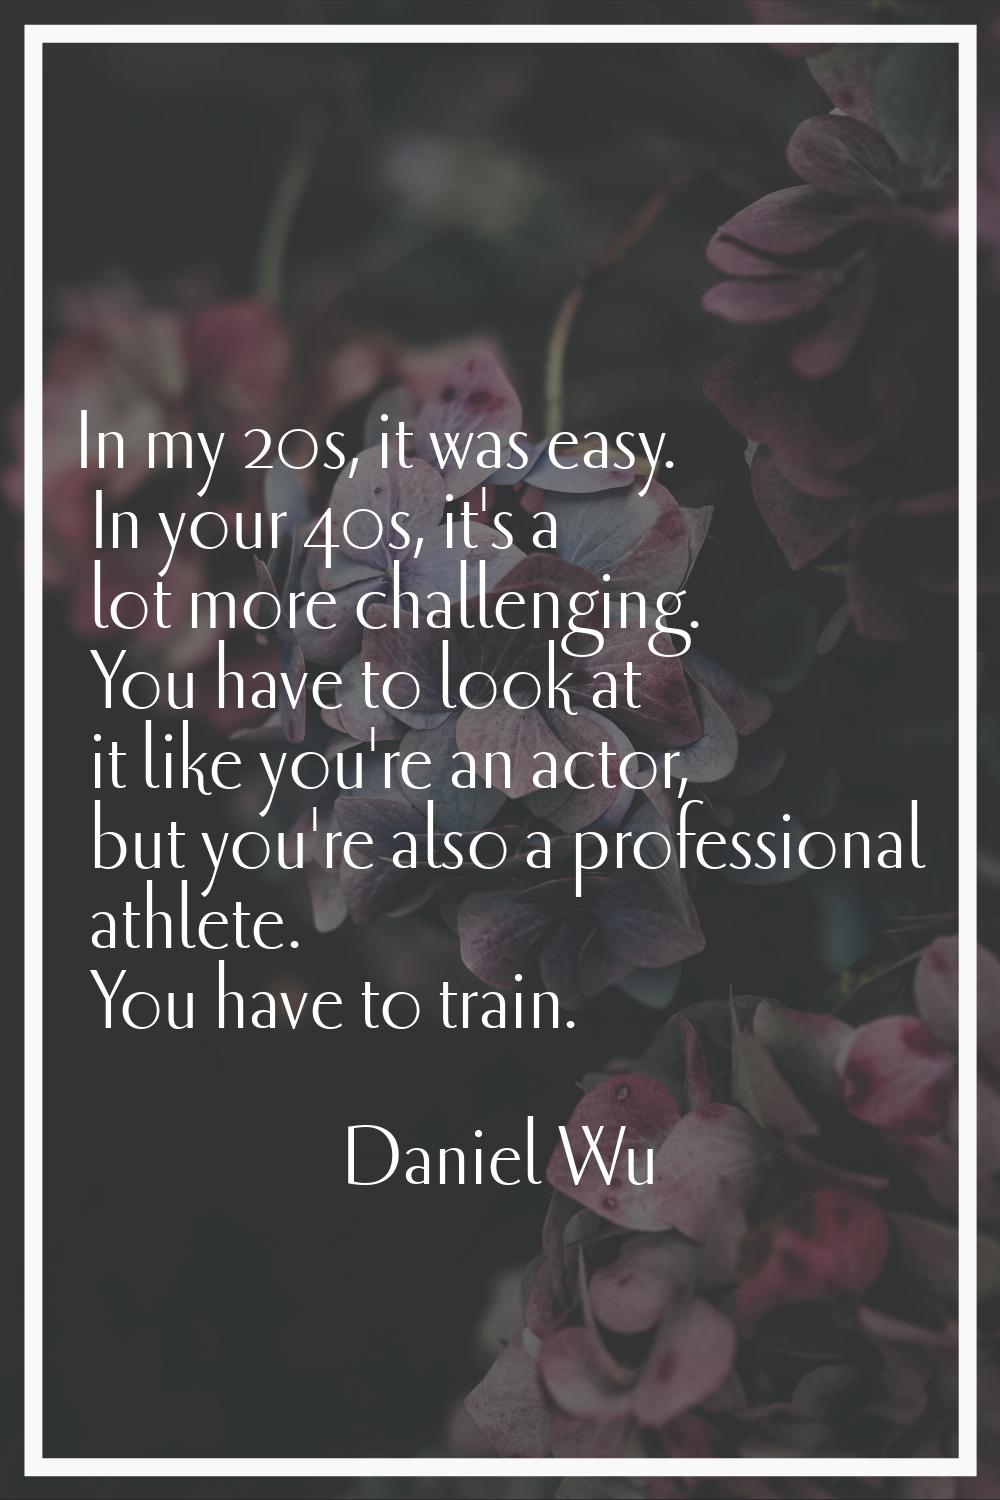 In my 20s, it was easy. In your 40s, it's a lot more challenging. You have to look at it like you'r